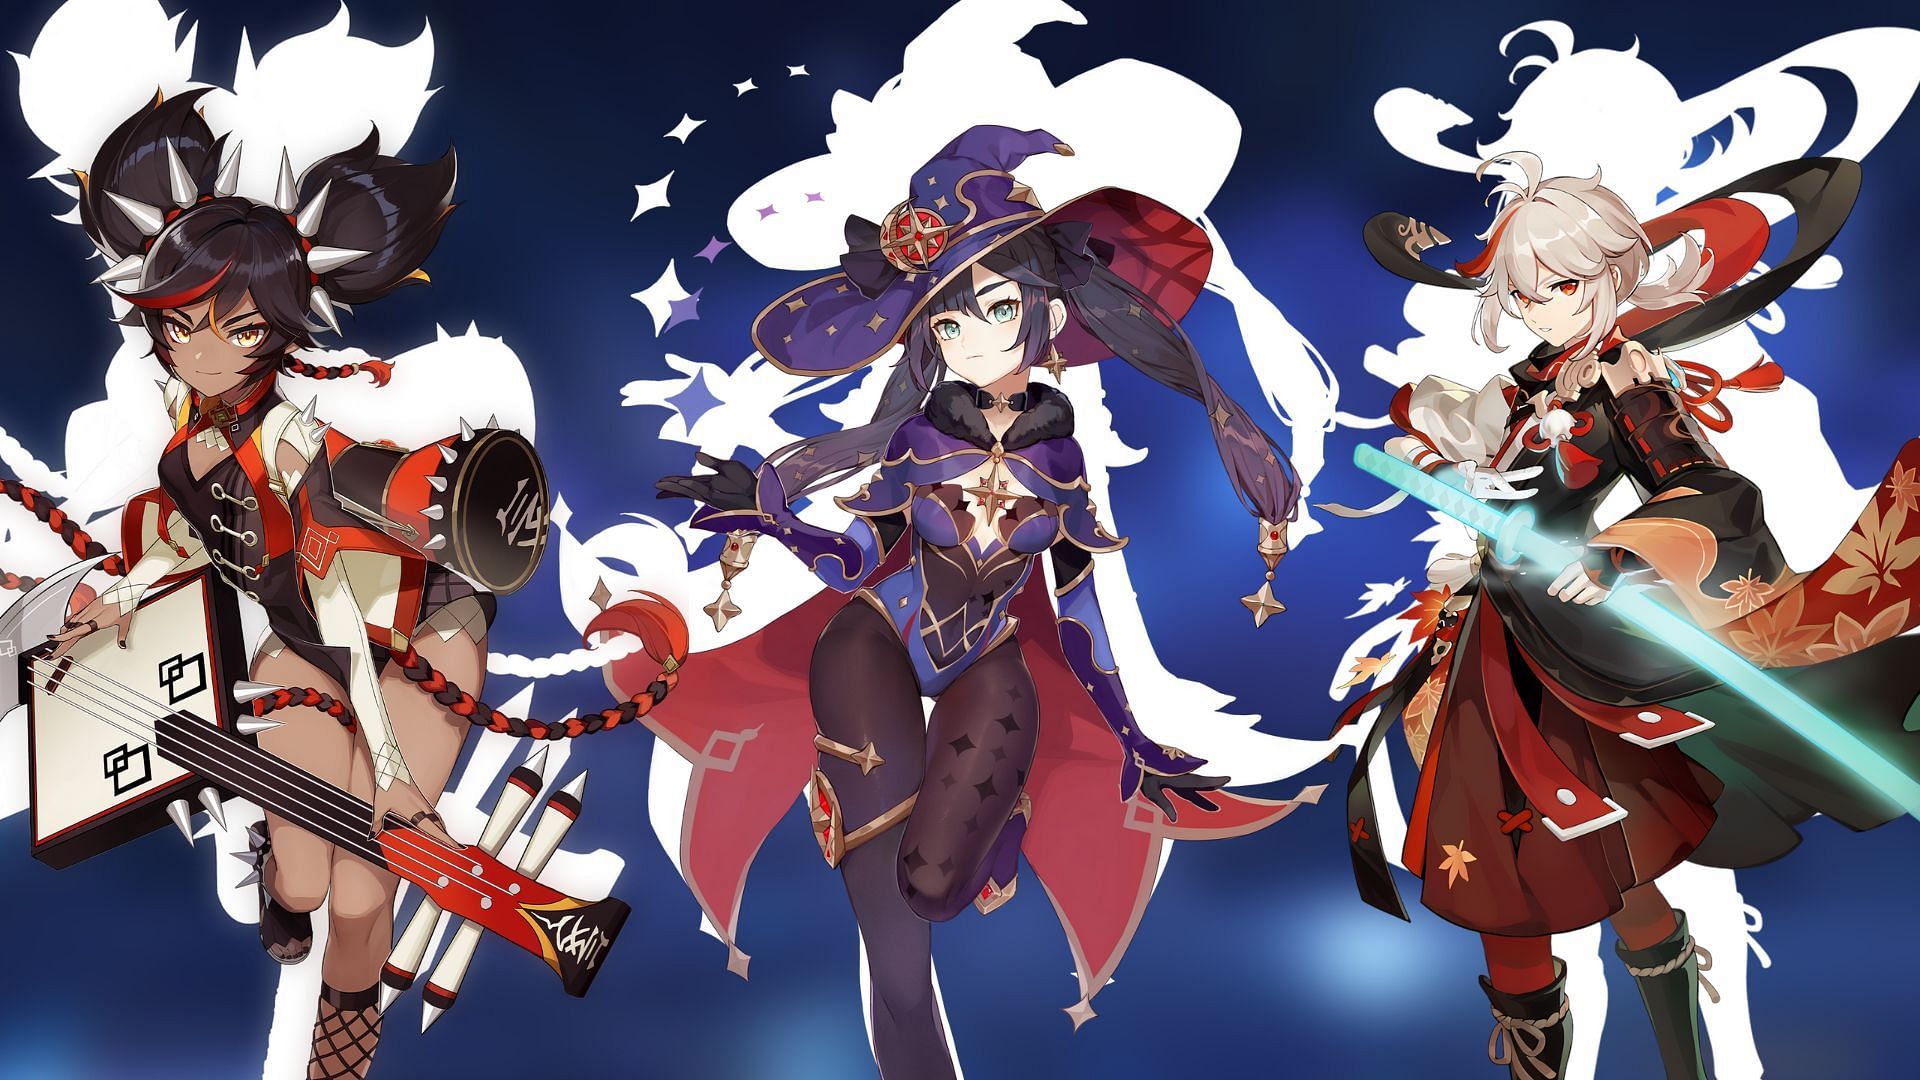 Genshin Impact  leaks reveal new domains for Mona, Kazuha, and Xinyan  from Golden Apple Archipelago